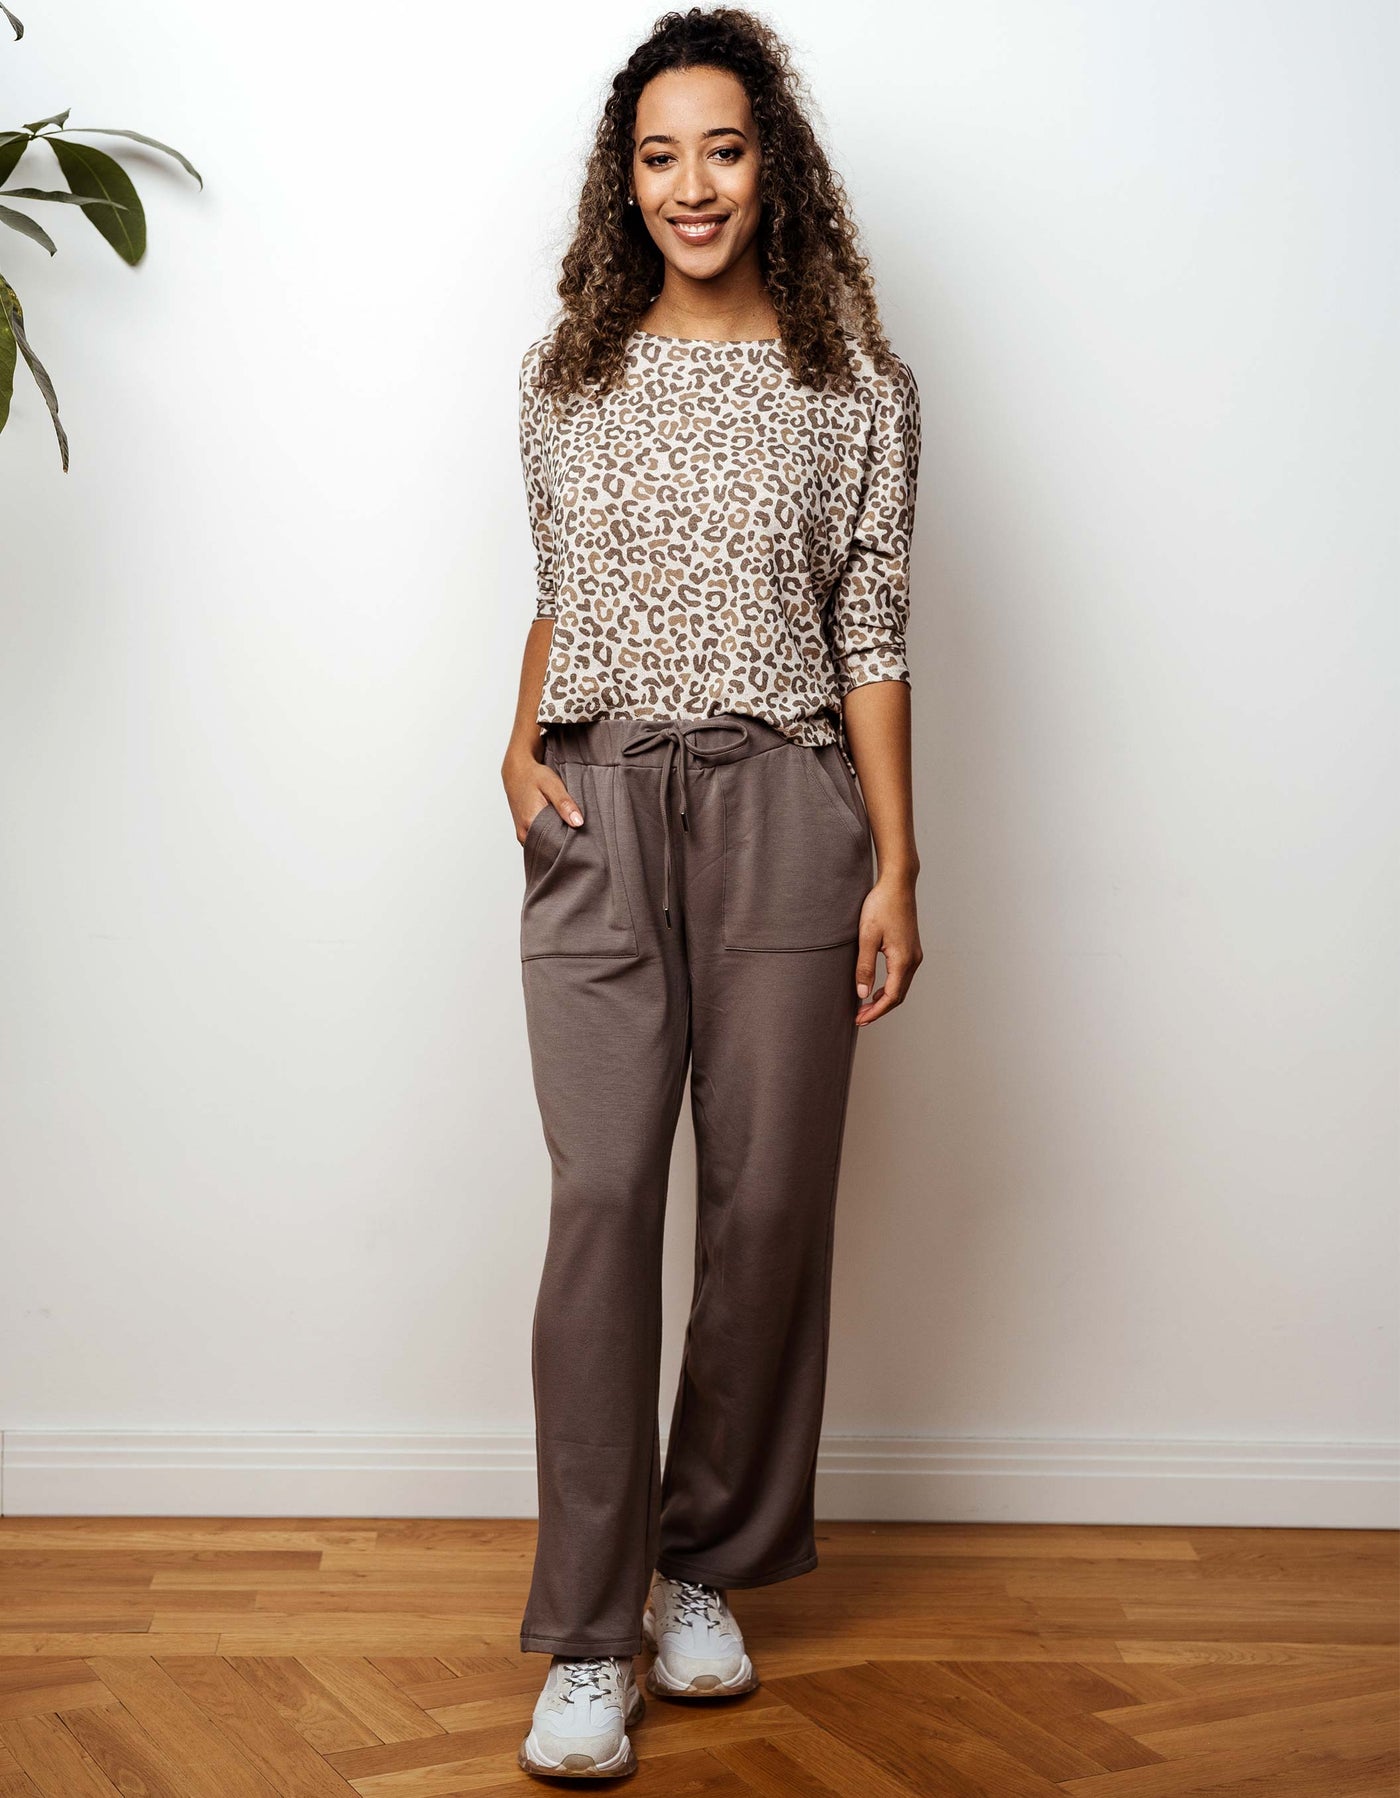 thebowattitude_casual_wear_luxury_home_wear_home-office_looks_outfit_set_oceans_pamela_fabletics_reif_apart_made-in-europe